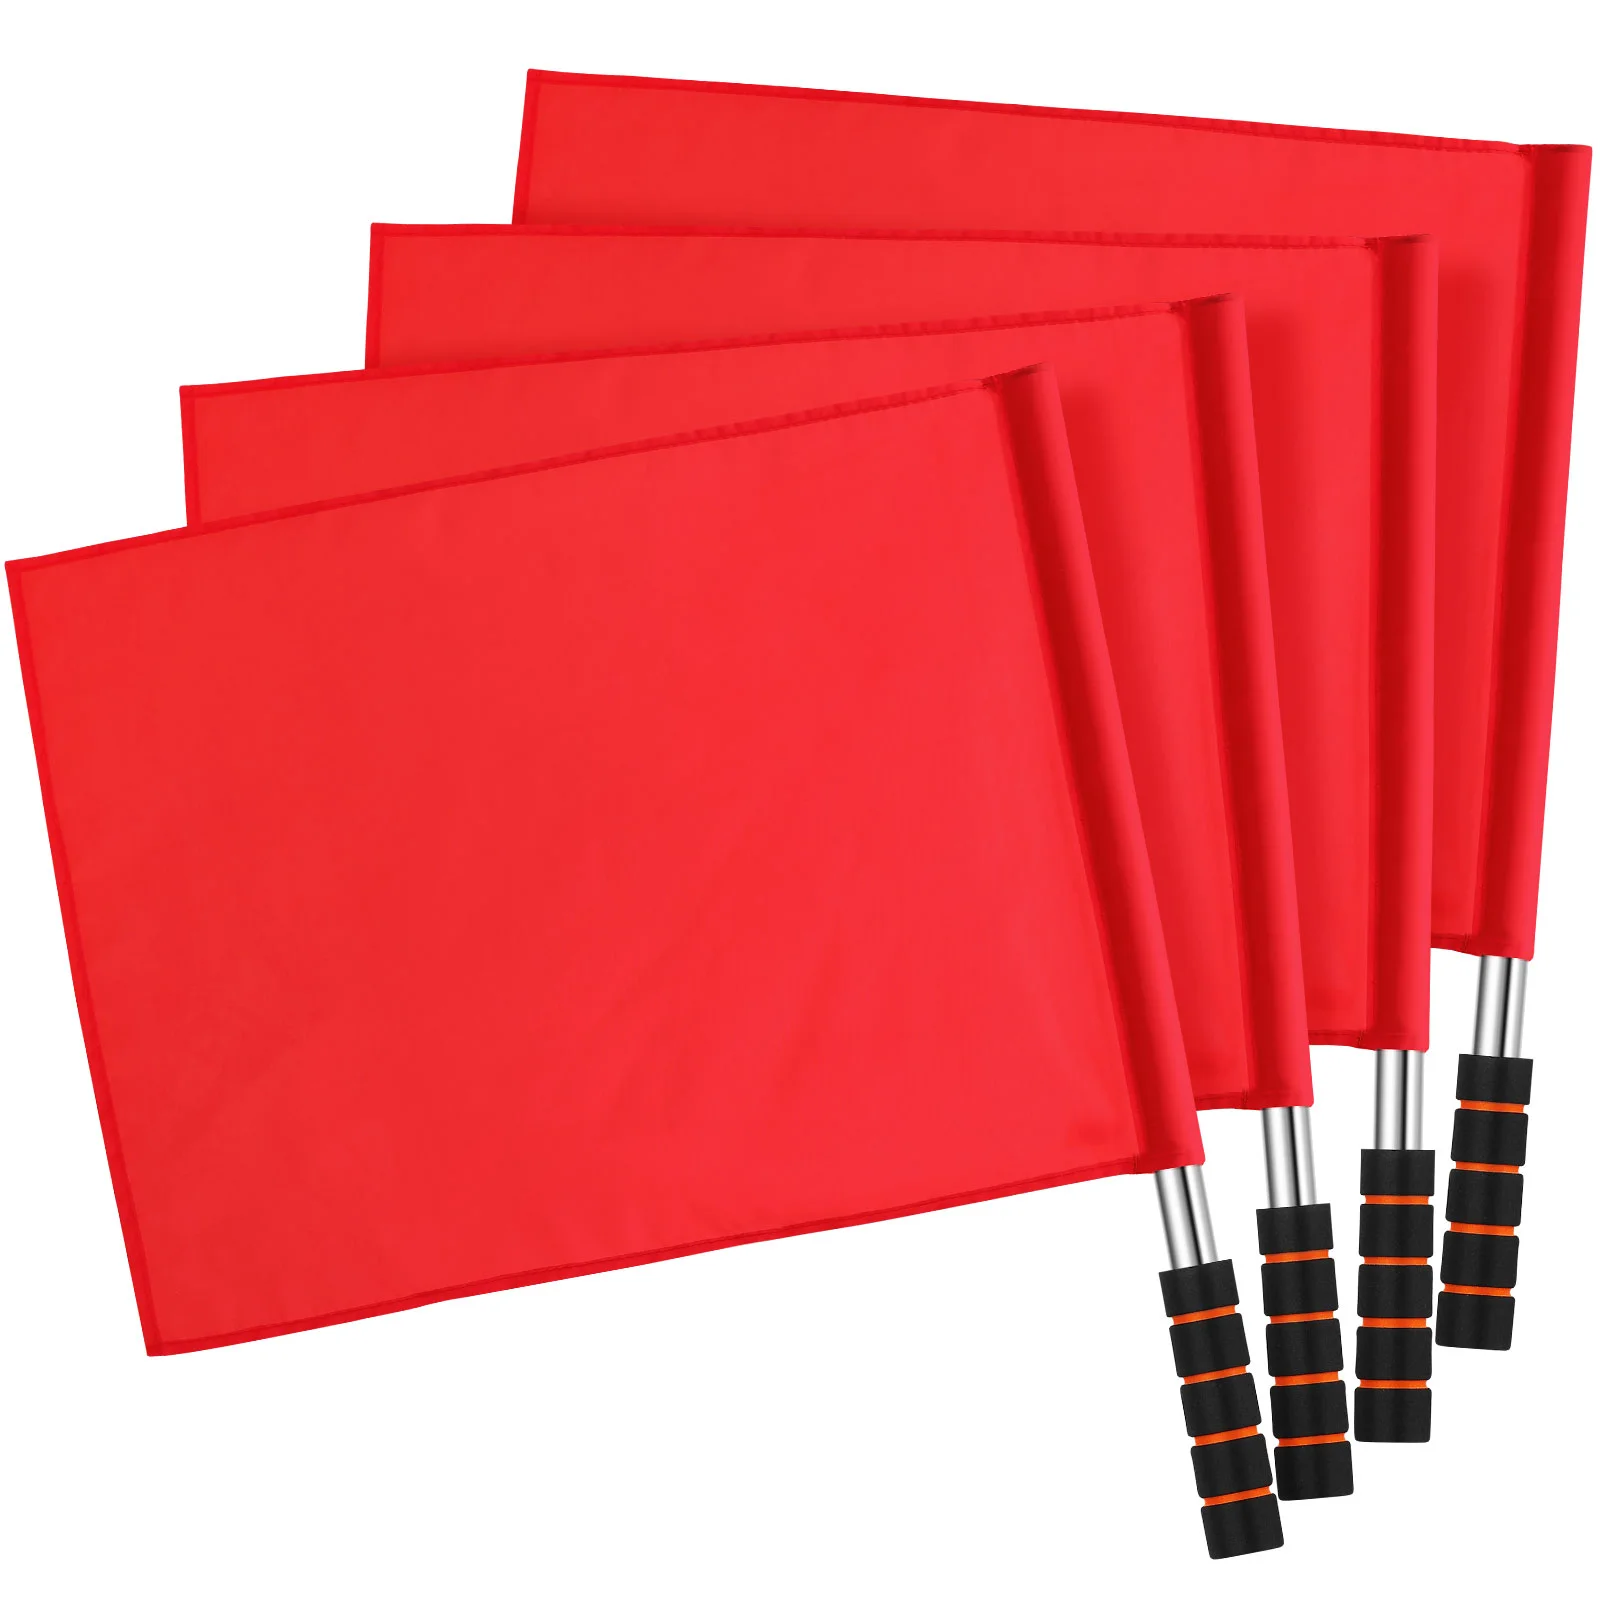 Referee Flags Hand Waving Referee Signal Flag For Game Play Practical Sports Training Match Competition Survival Equipment 2 pcs signal flag traffic flags sports game referee polyester cotton waving for racing